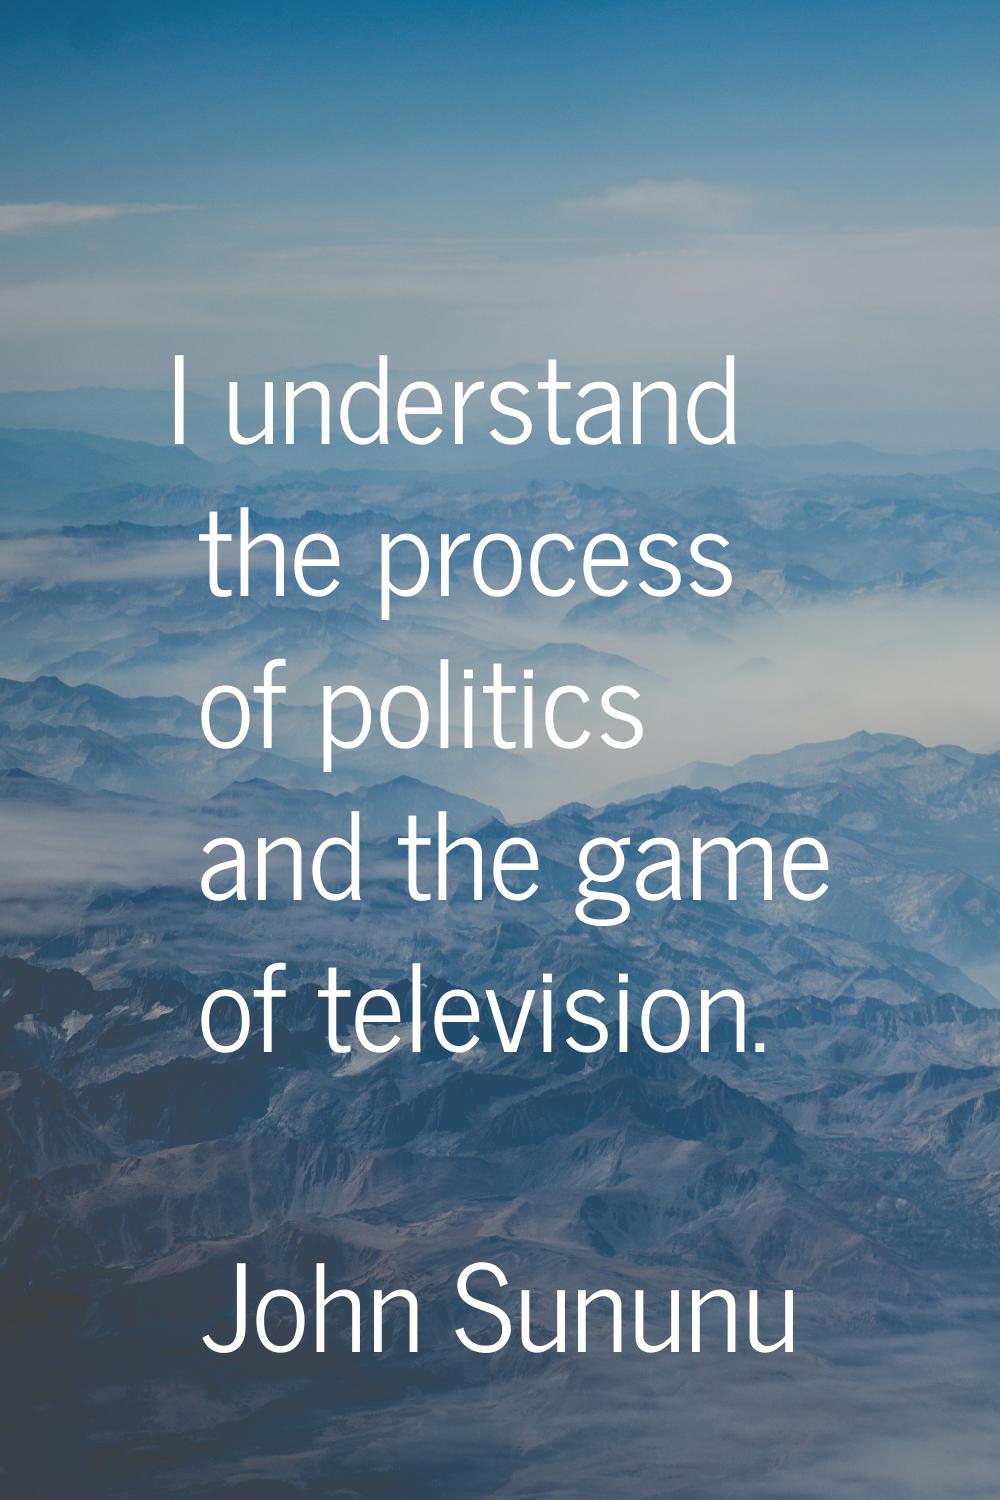 I understand the process of politics and the game of television.